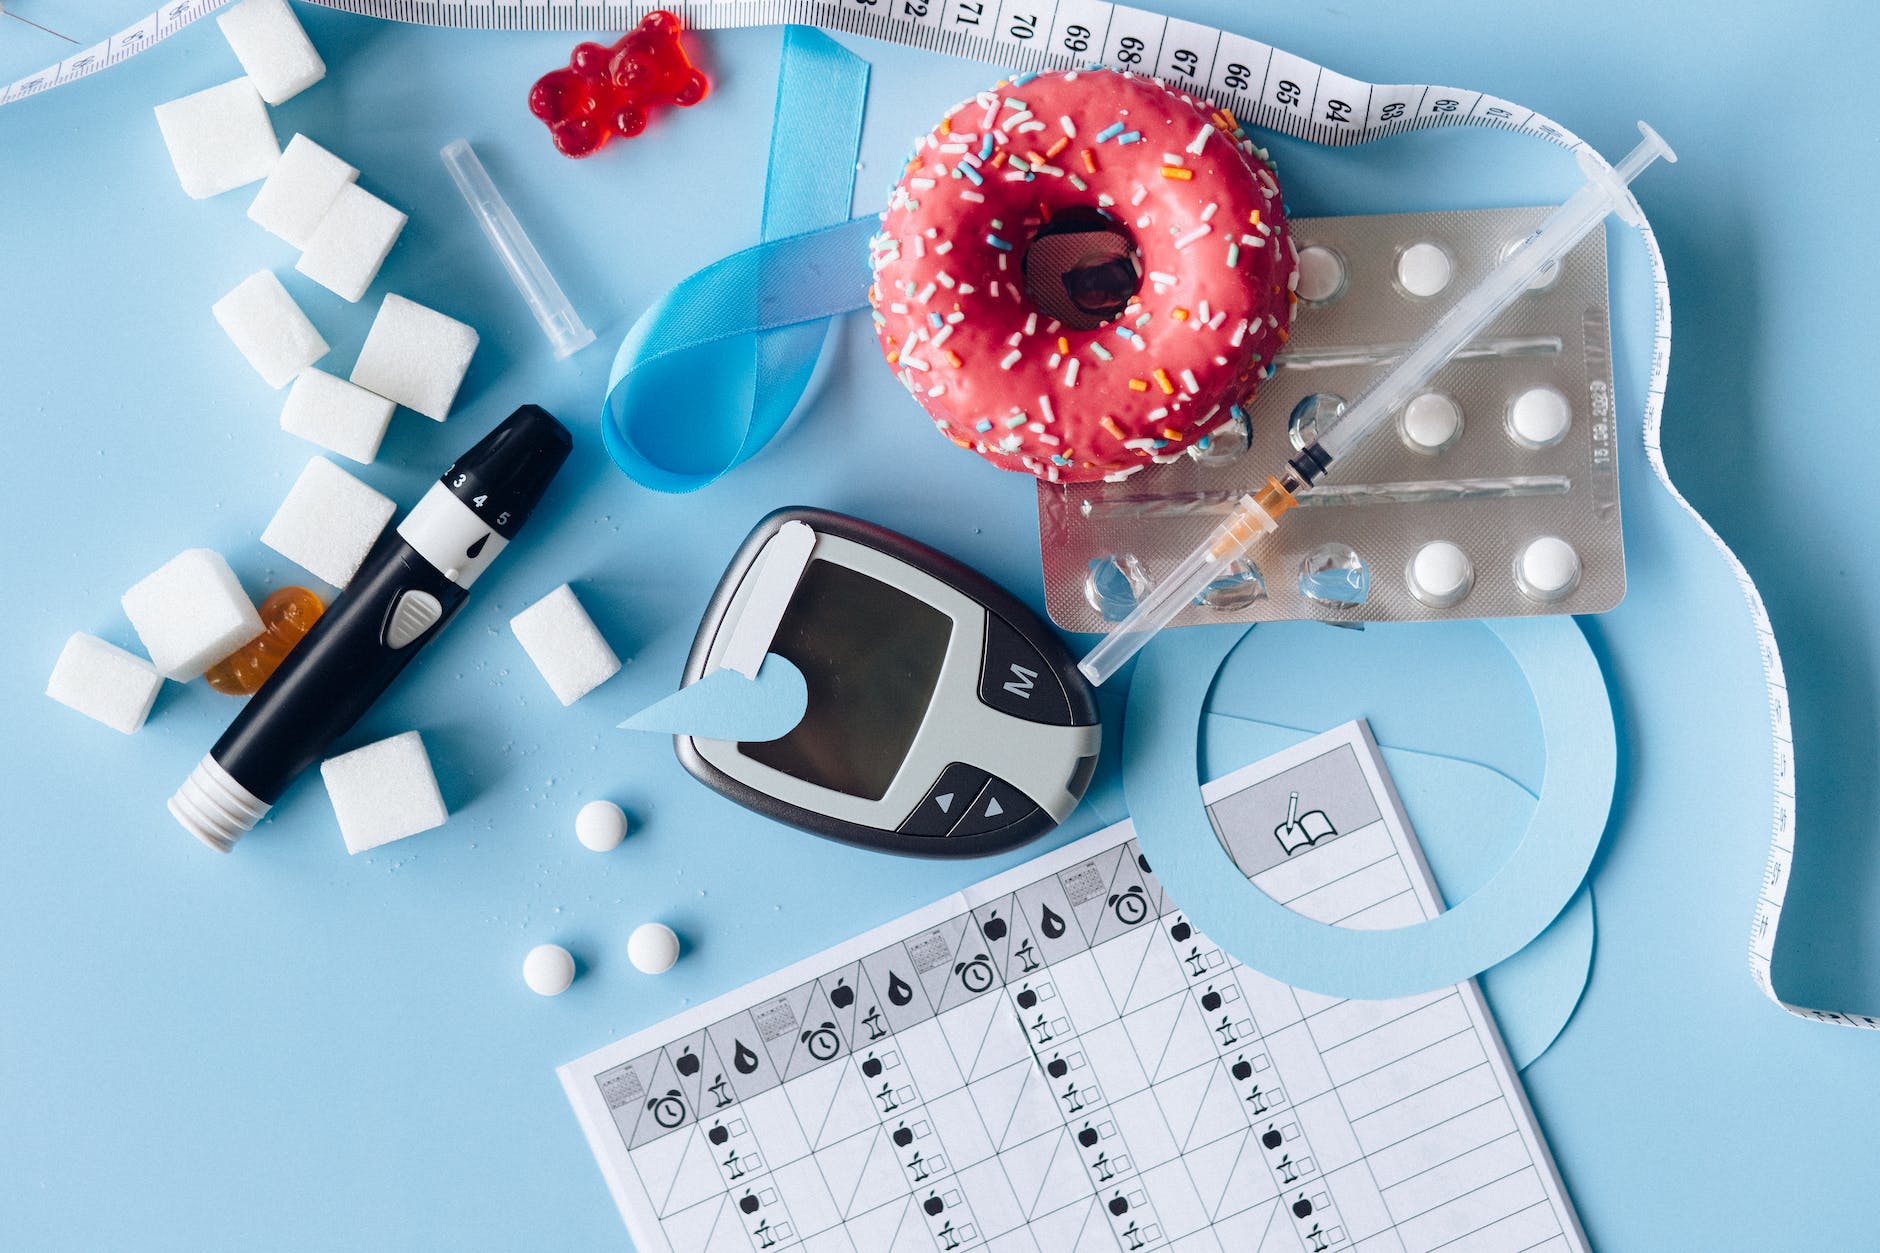 diabetes medicine with sugar and donuts. The diabetes myth is that it has to get worse. 